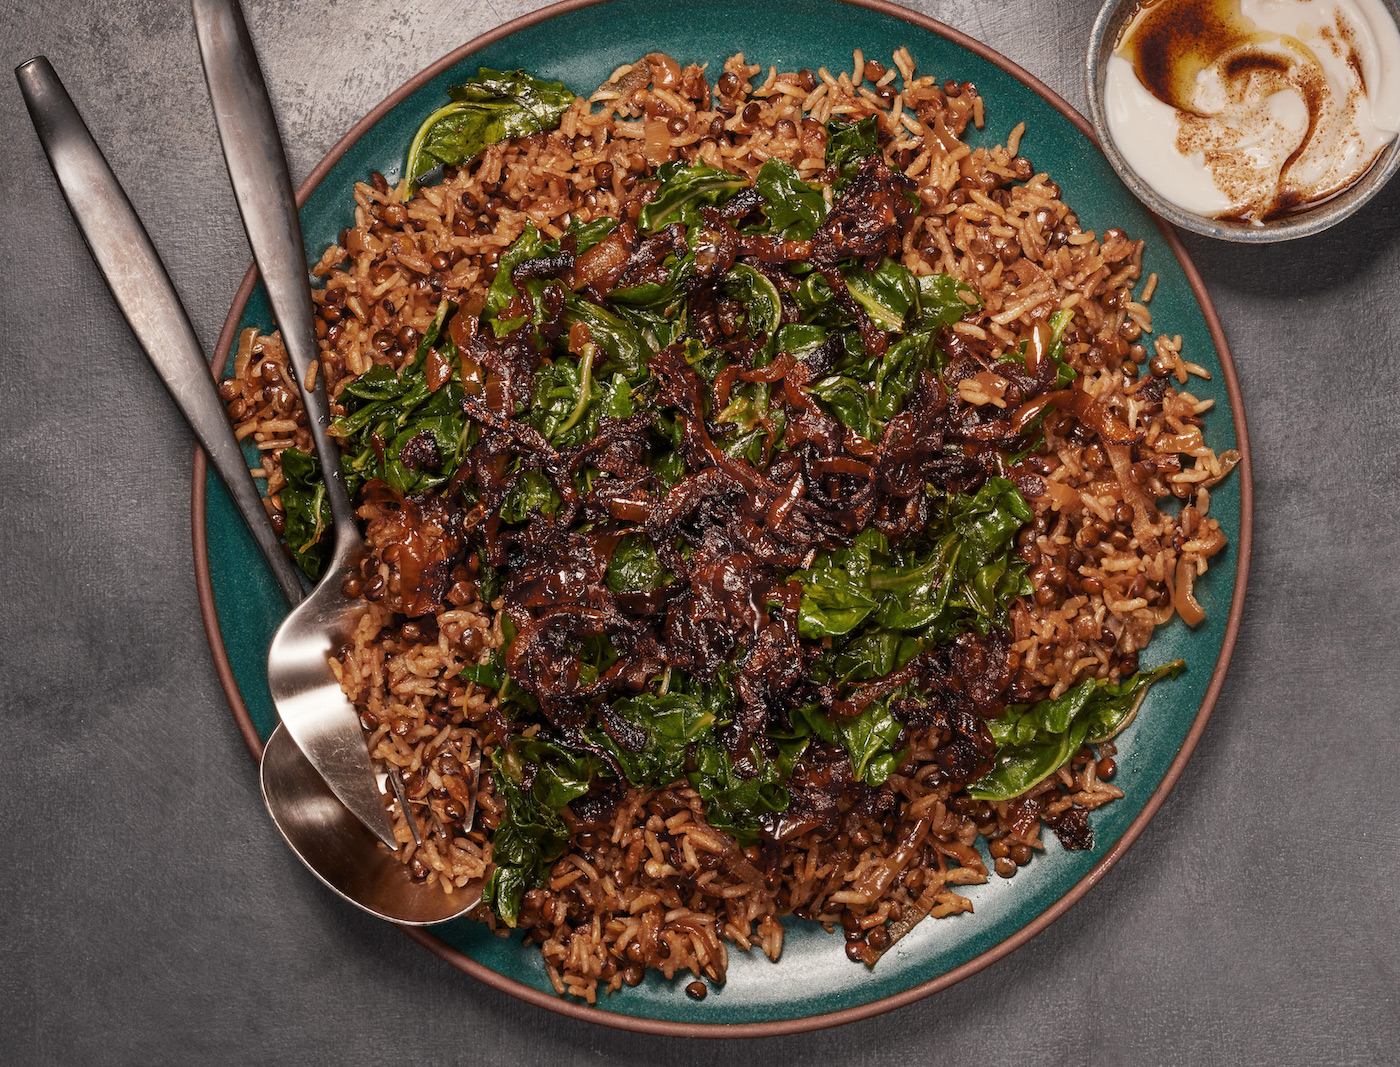 Spiced Rice and Lentils with Greens and Garlicky Yogurt 